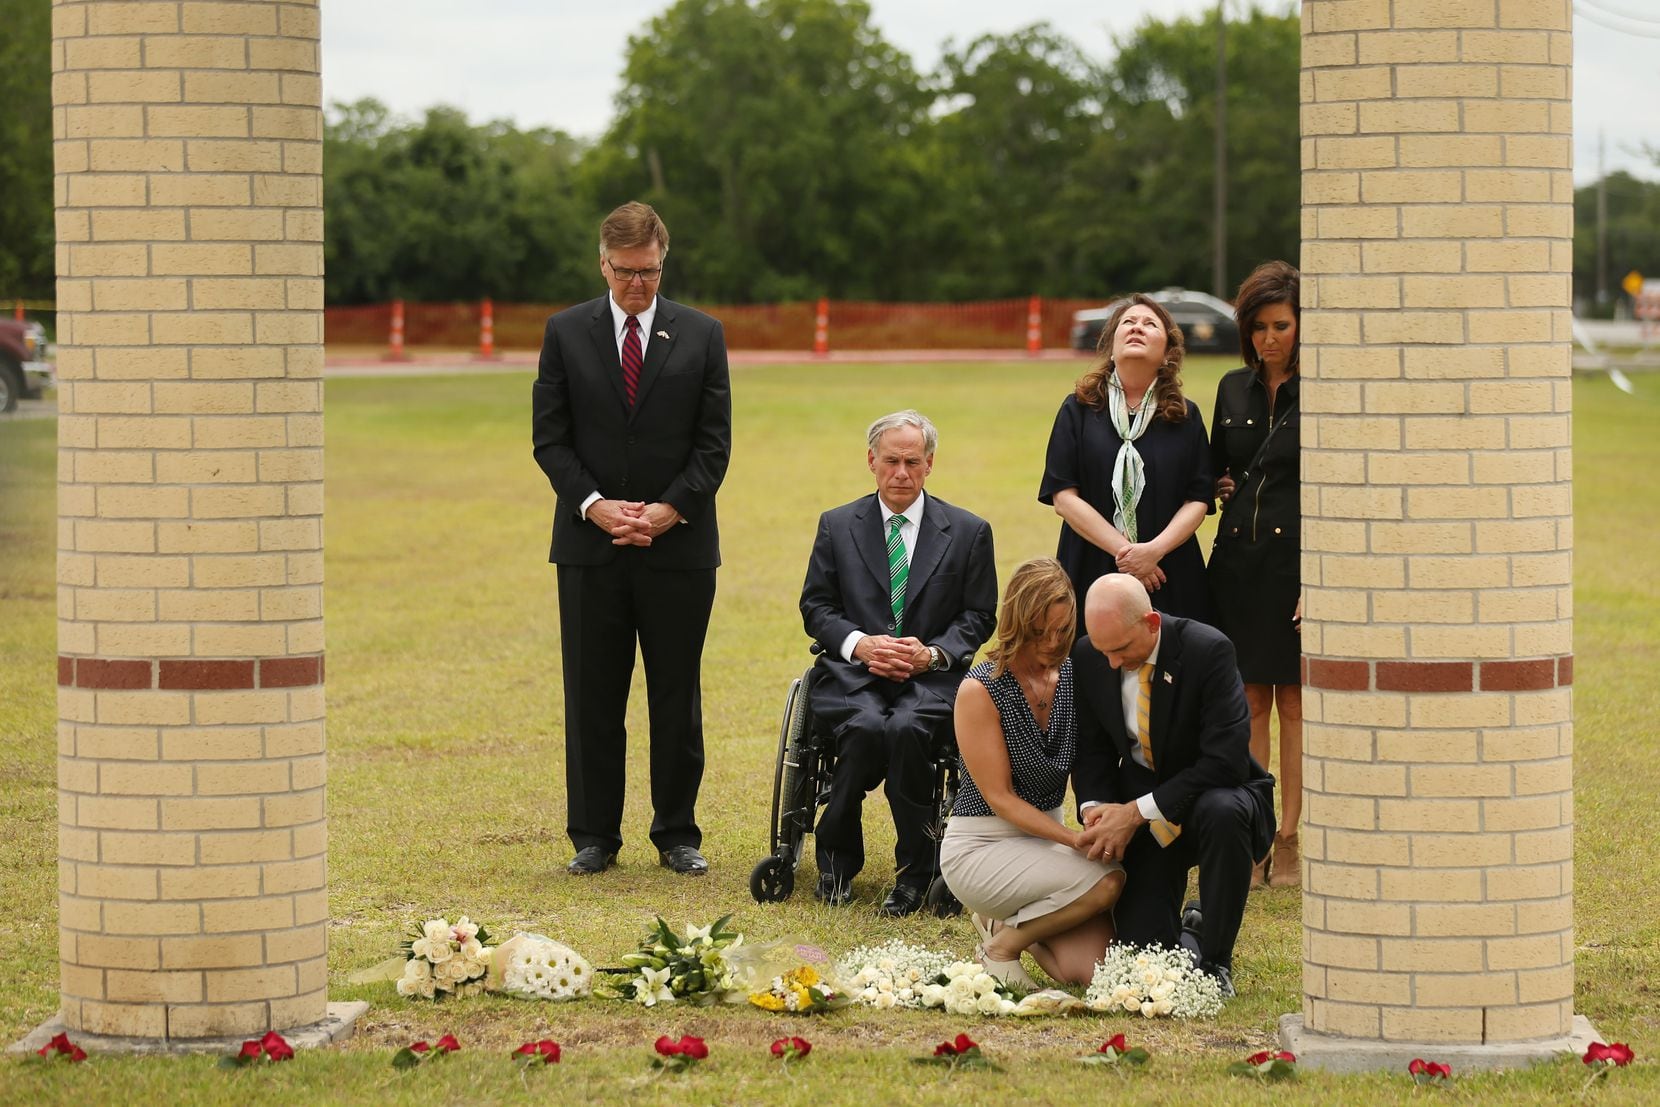 Texas Lt. Gov. Dan Patrick, Gov. Greg Abbott, and Texas first lady Cecilia Abbott pause and reflect after laying flowers at Santa Fe High School in Santa Fe, Texas Sunday May 20, 2018. On Friday morning May 18, 10 people were killed and 13 were injured after a shooting at Santa Fe High School.